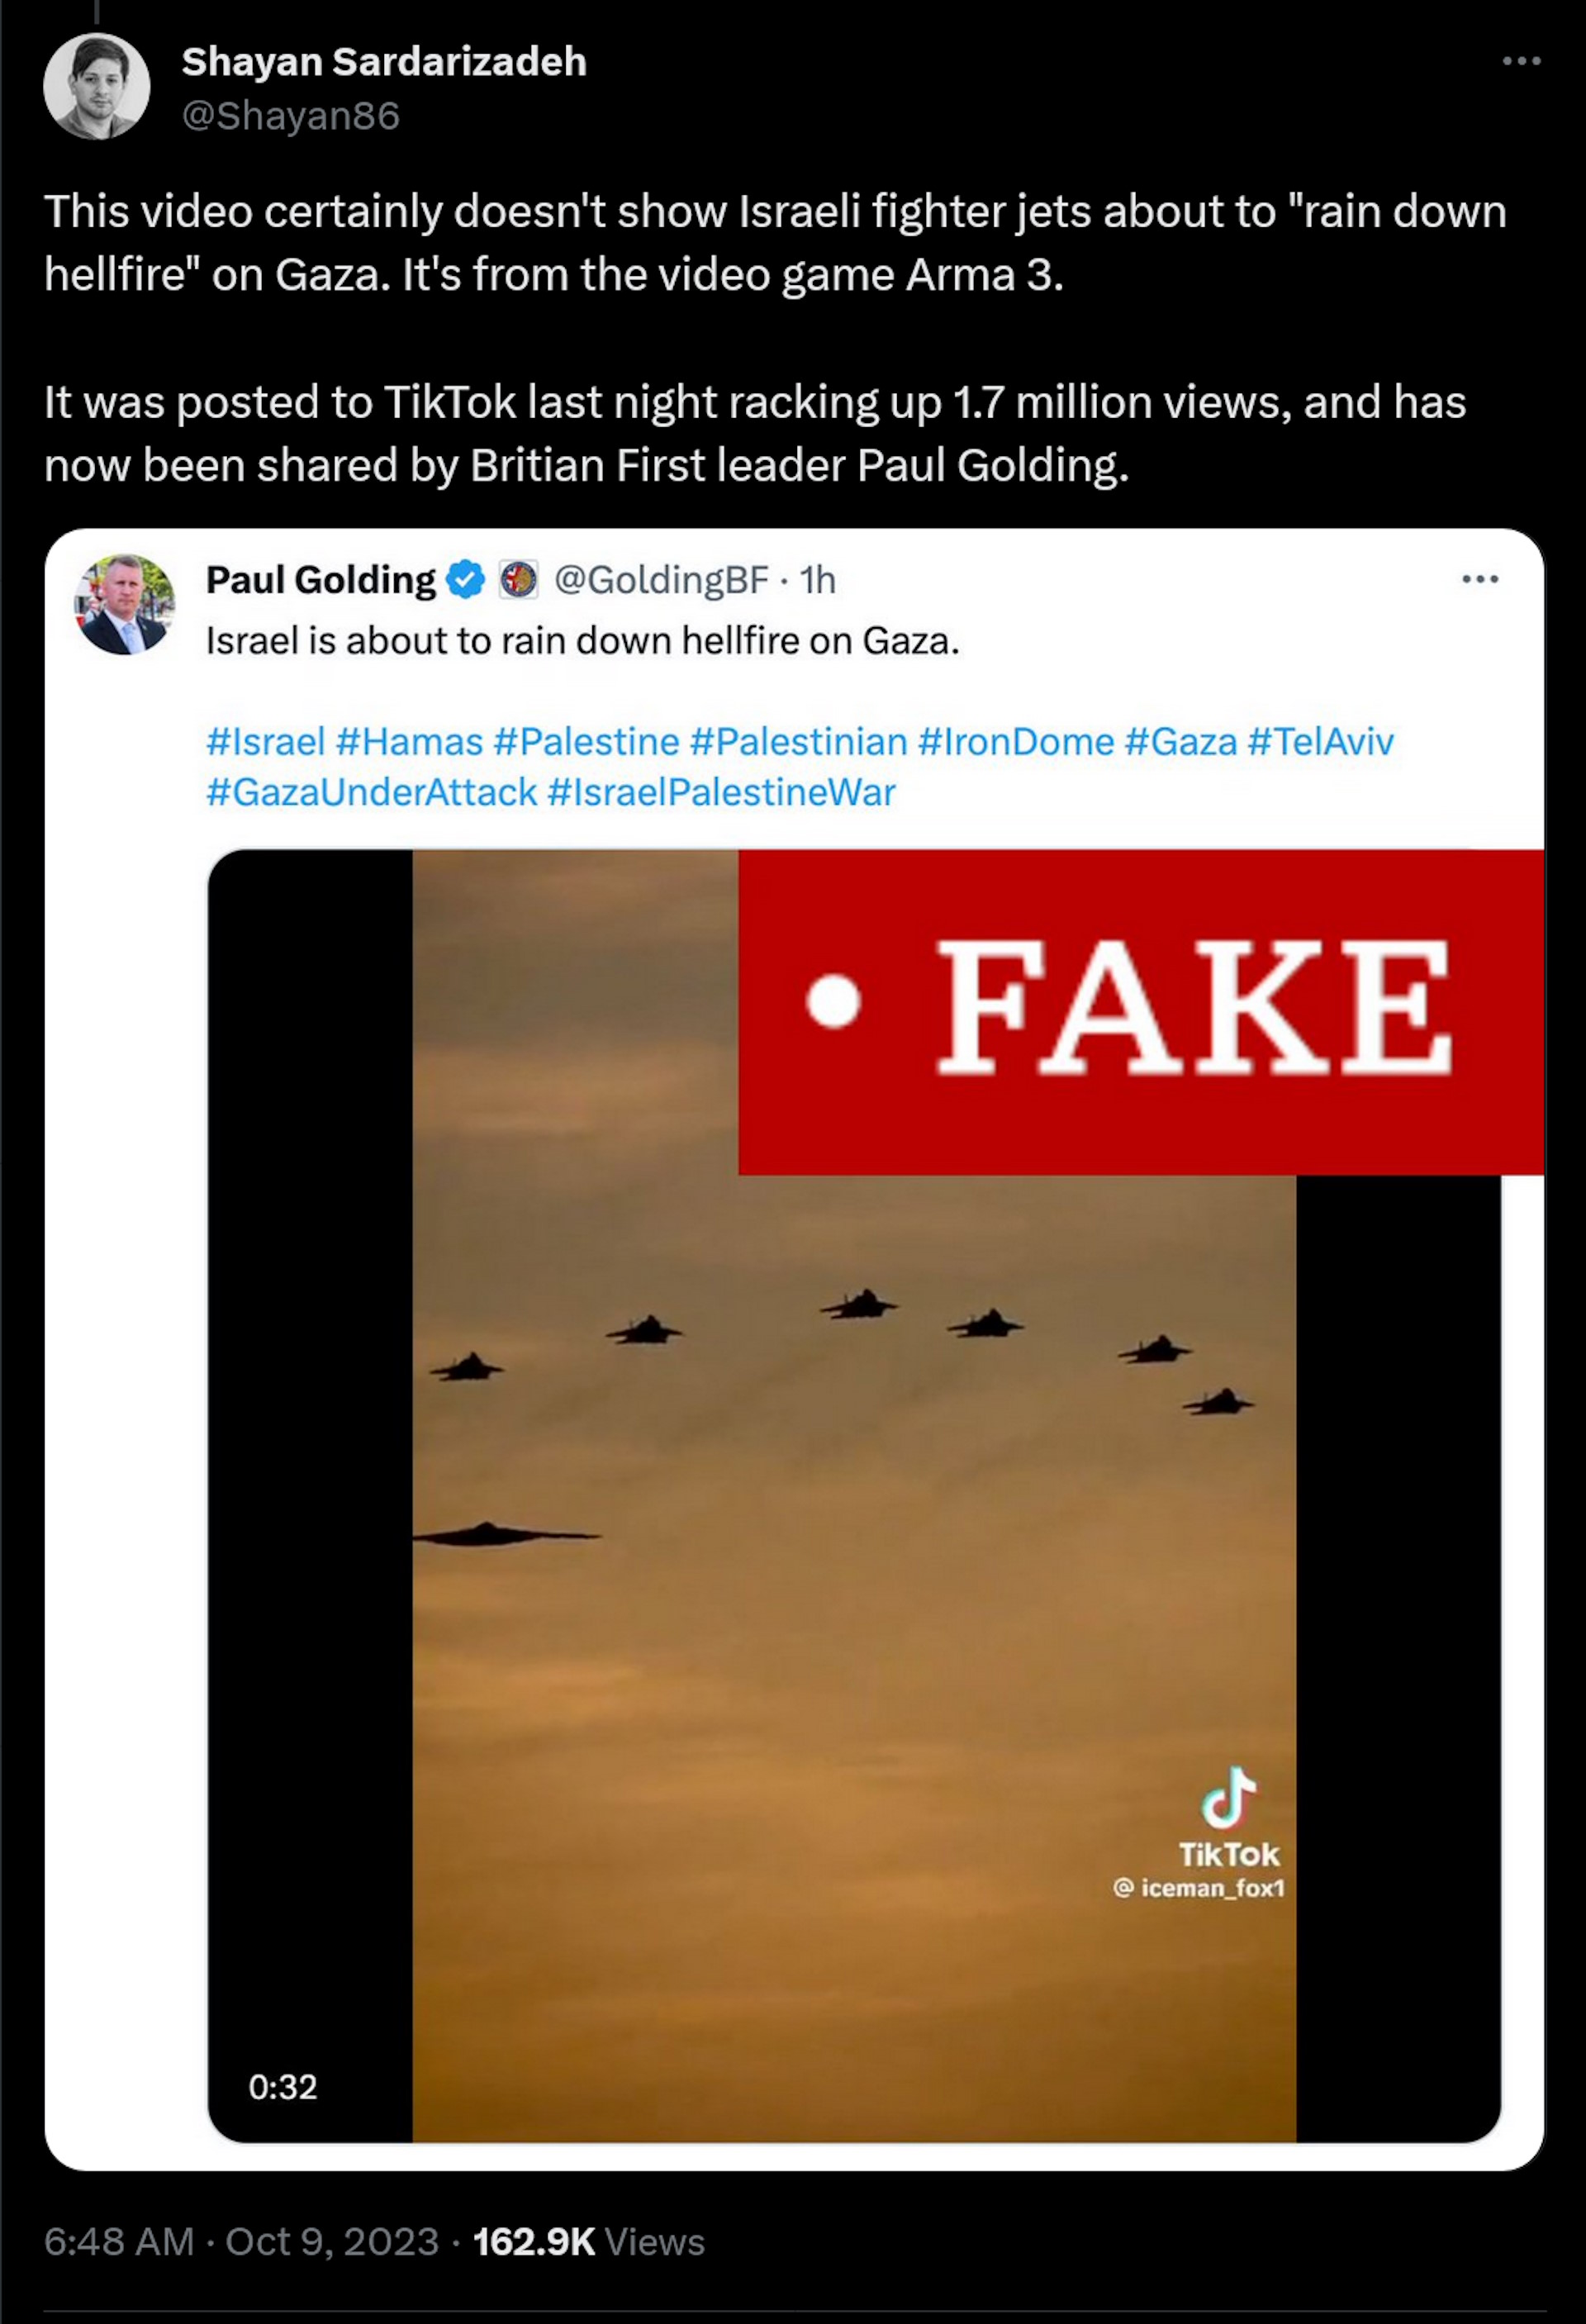 This video certainly doesn't show Israeli fighter jets about to "rain down hellfire" on Gaza. It's from the video game Arma 3. It was posted to TikTok last night racking up 1.7 million views, and has now been shared by Britian First leader Paul Golding.